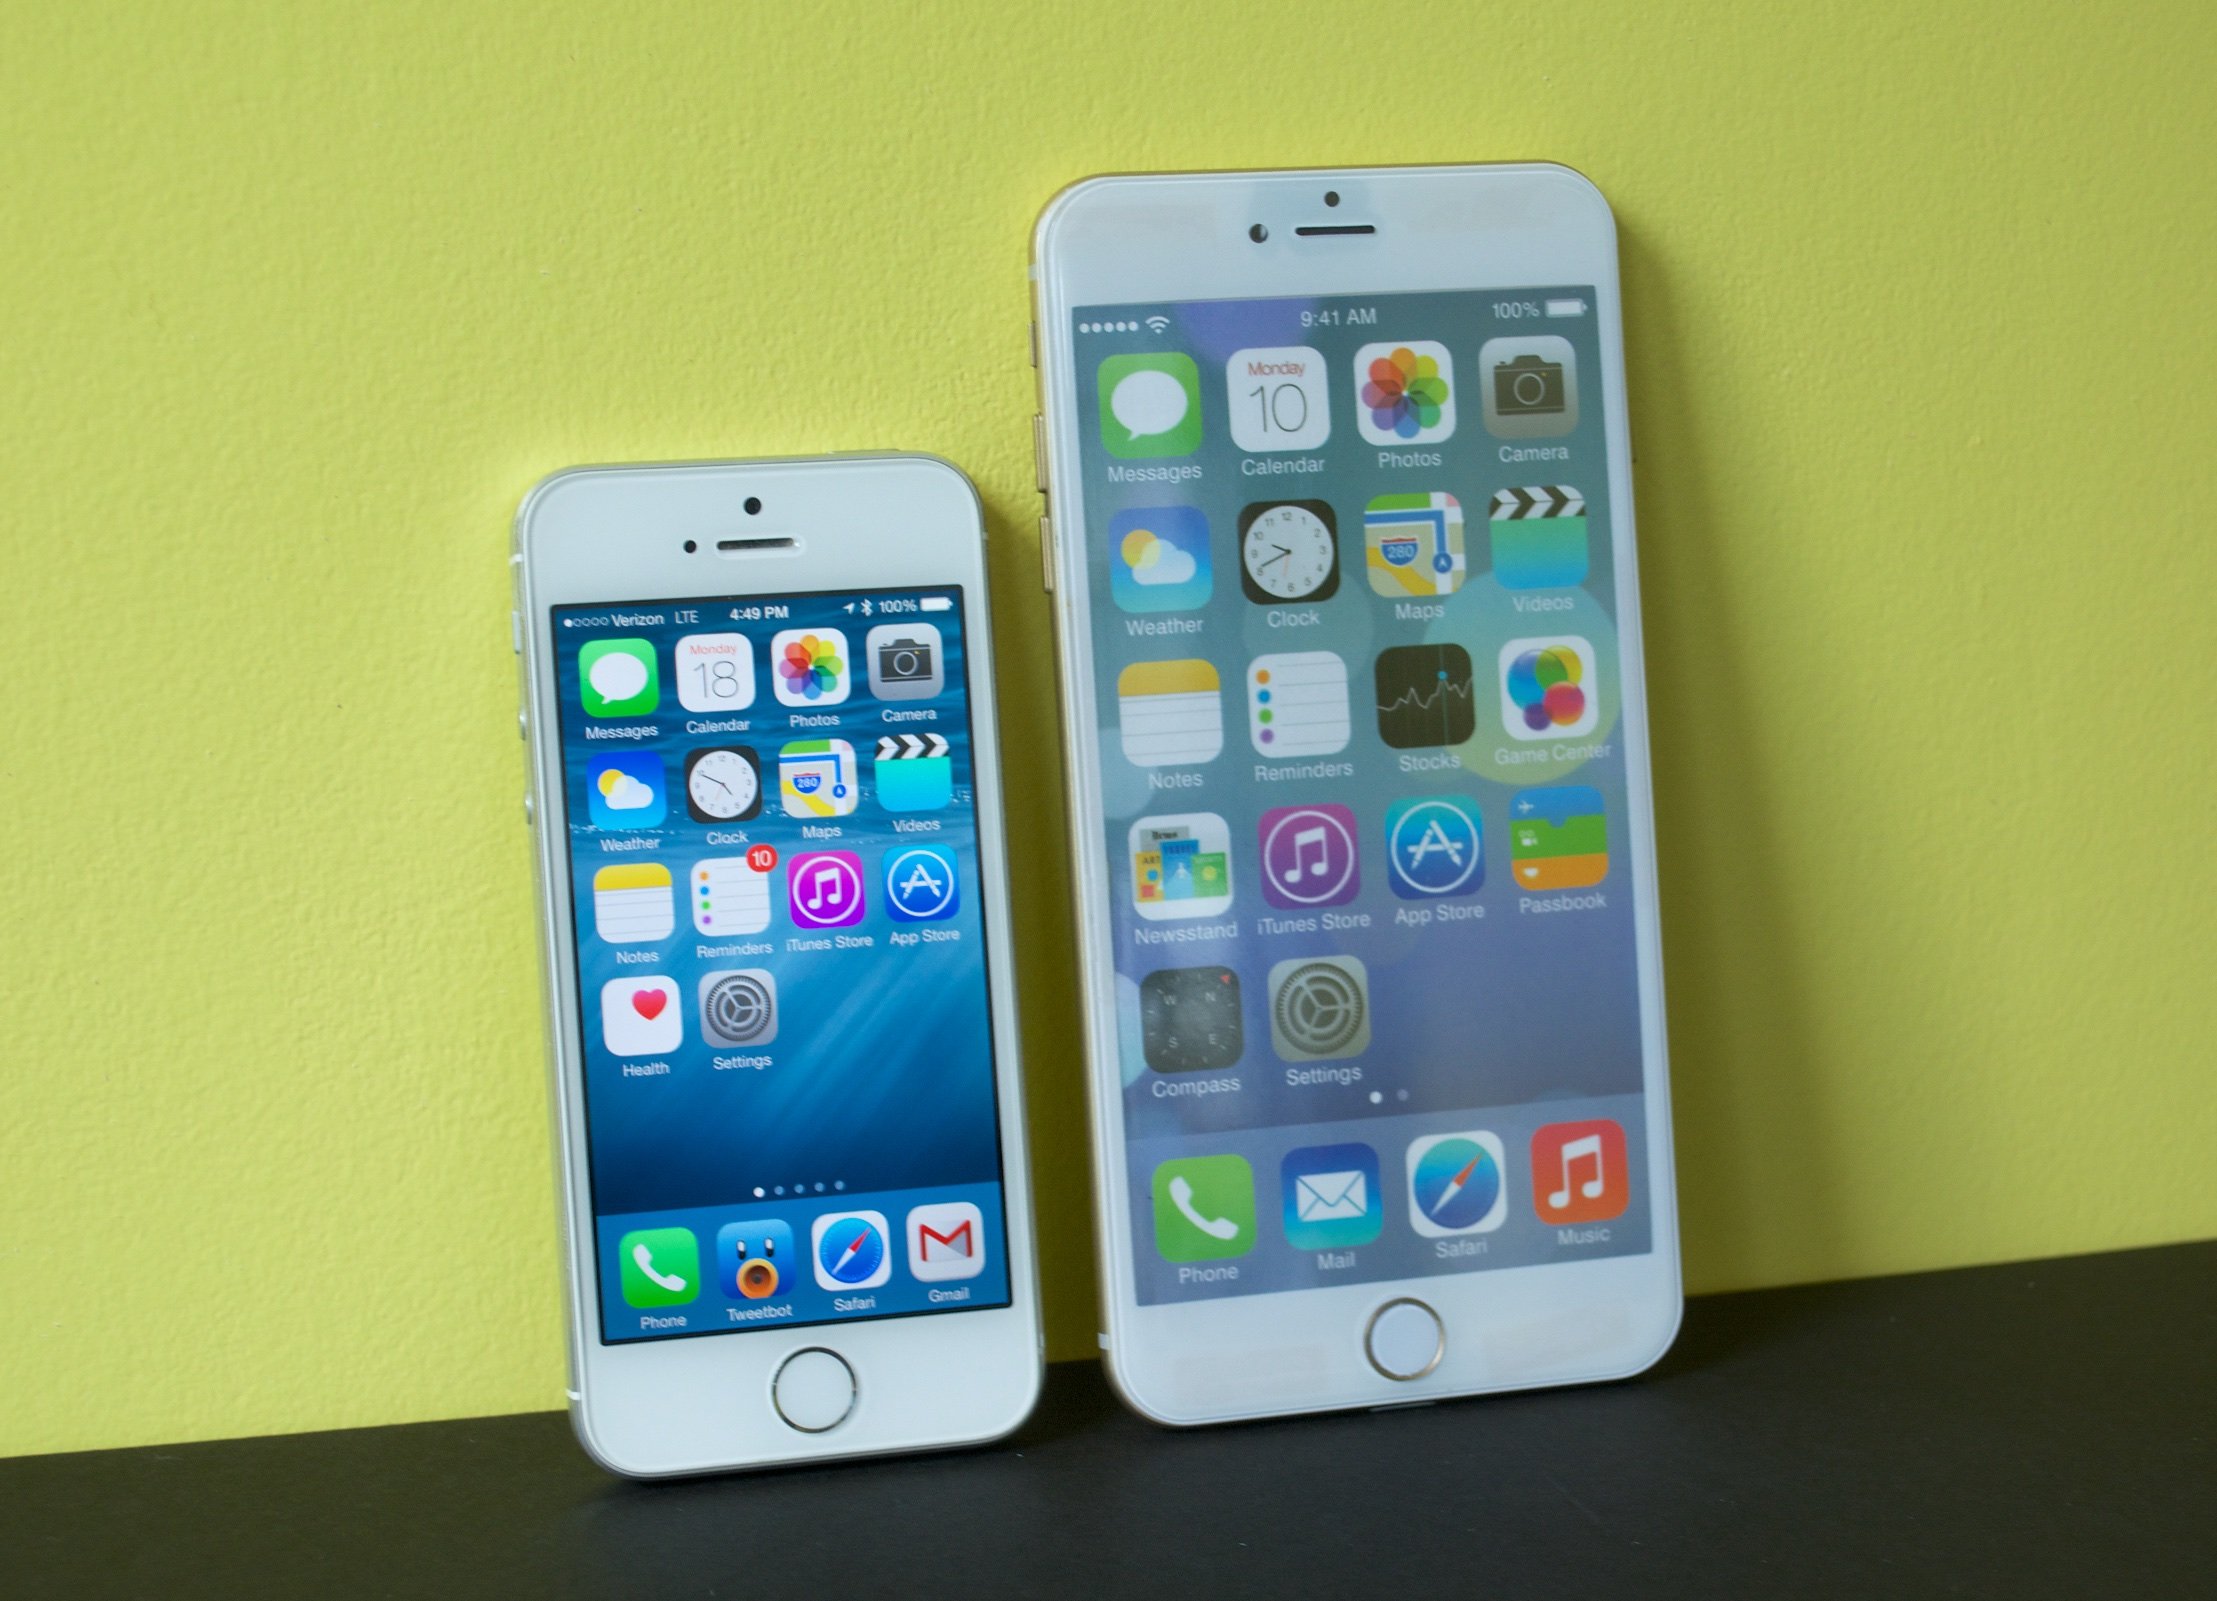 The 5.5-inch iPhone 6 vs iPhone 5s screen size comparison shows a major upgrade.